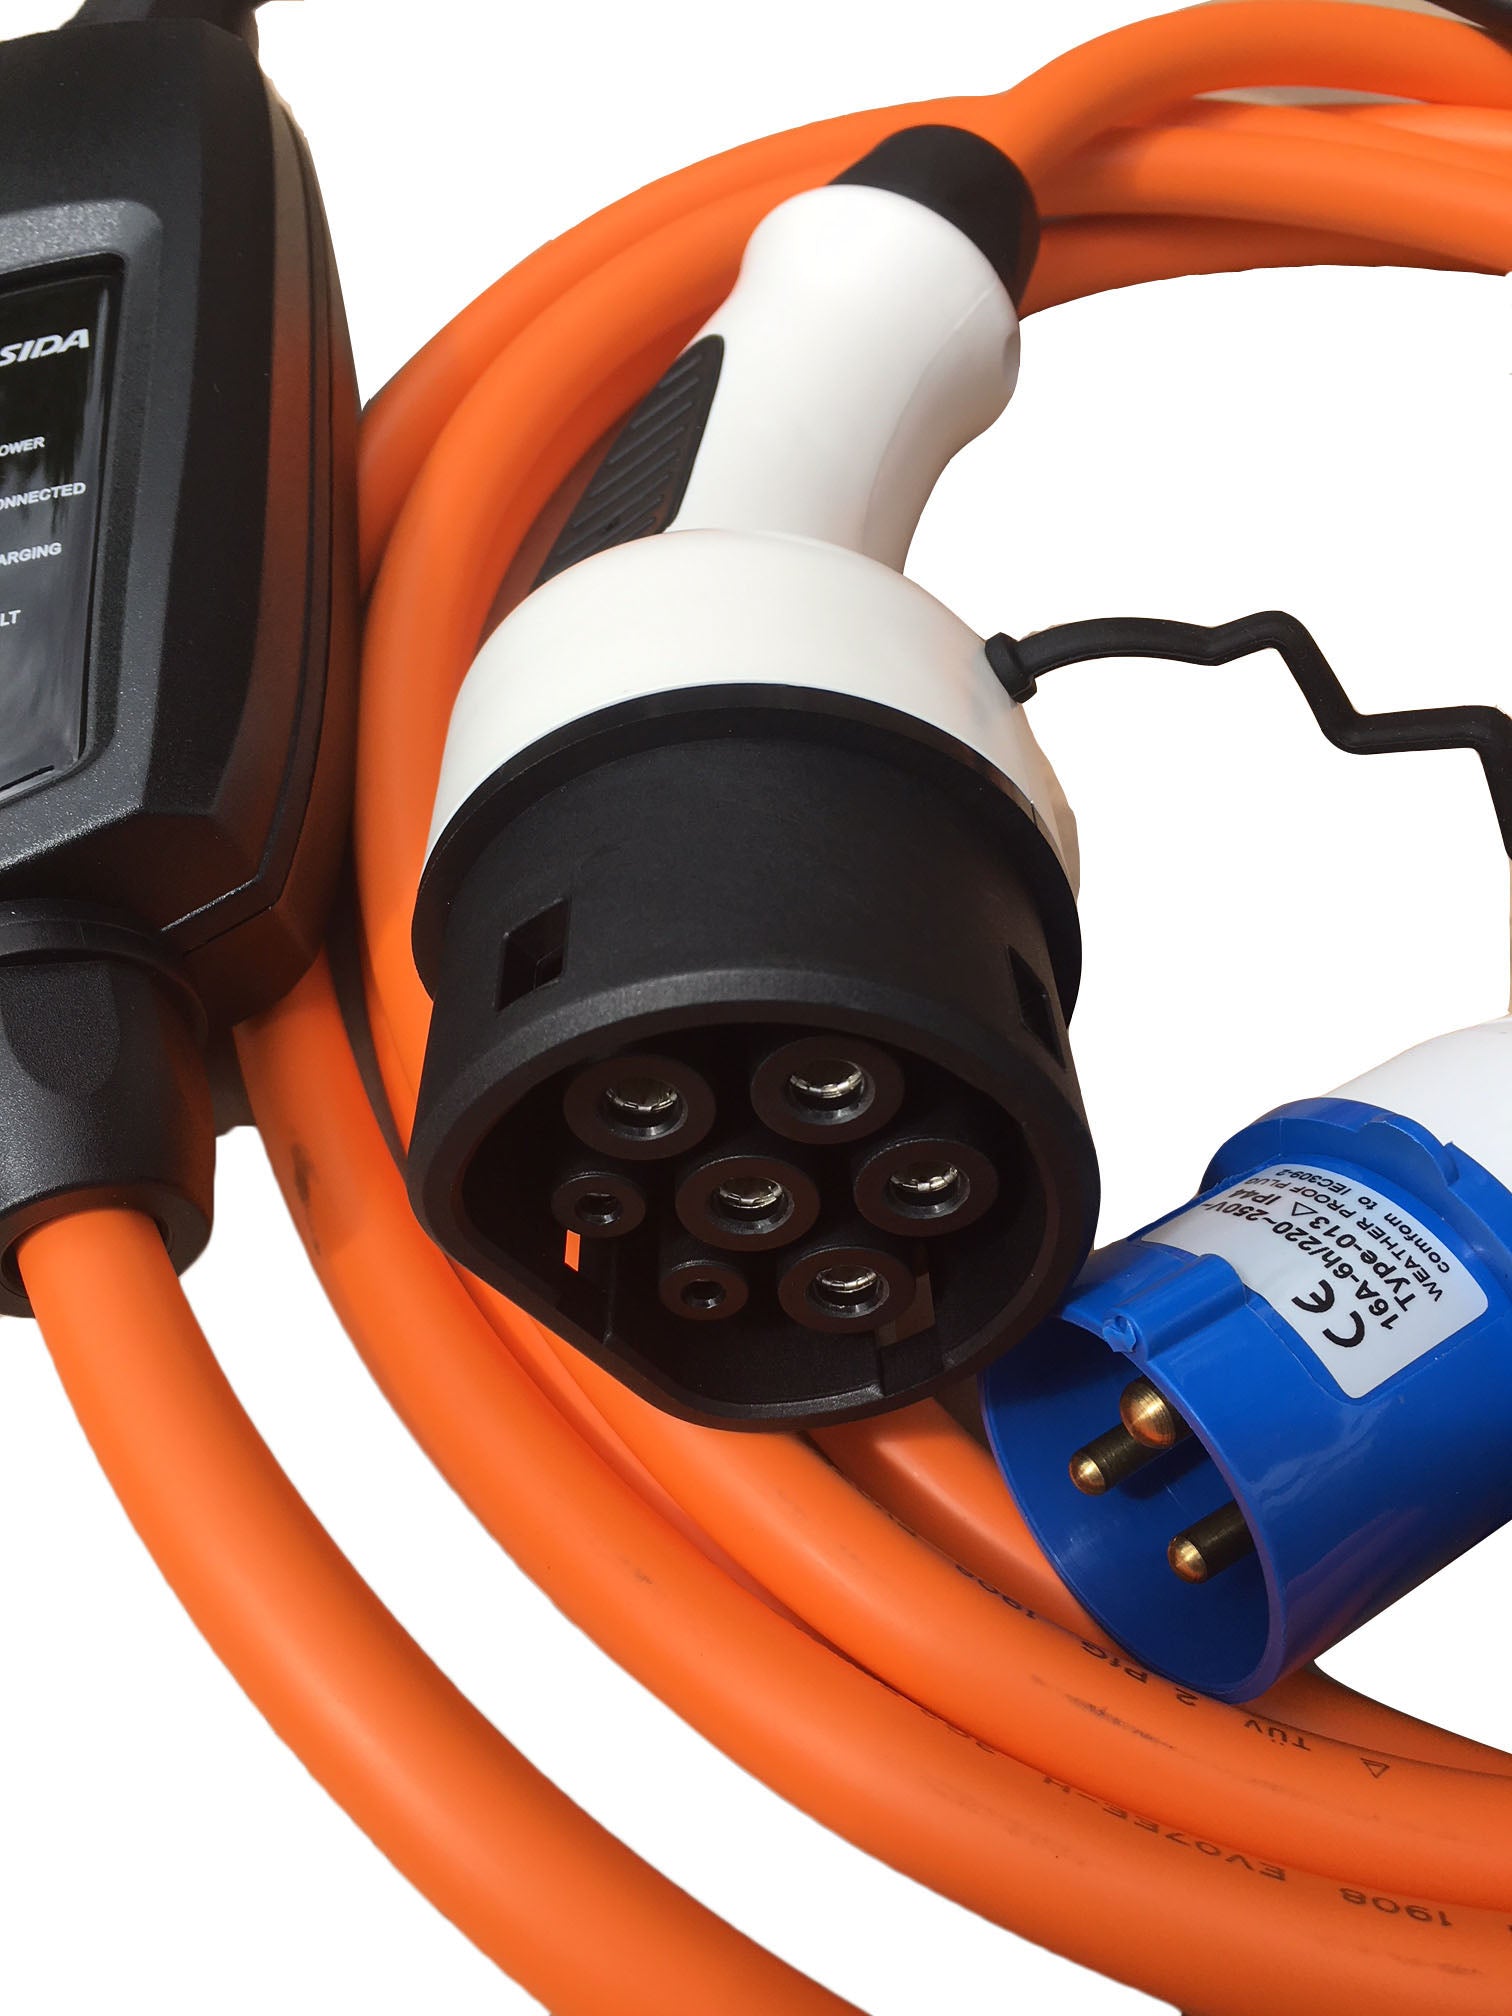 Type 2 EV Charger Cable with Cee Wall Plug - China EV Charging